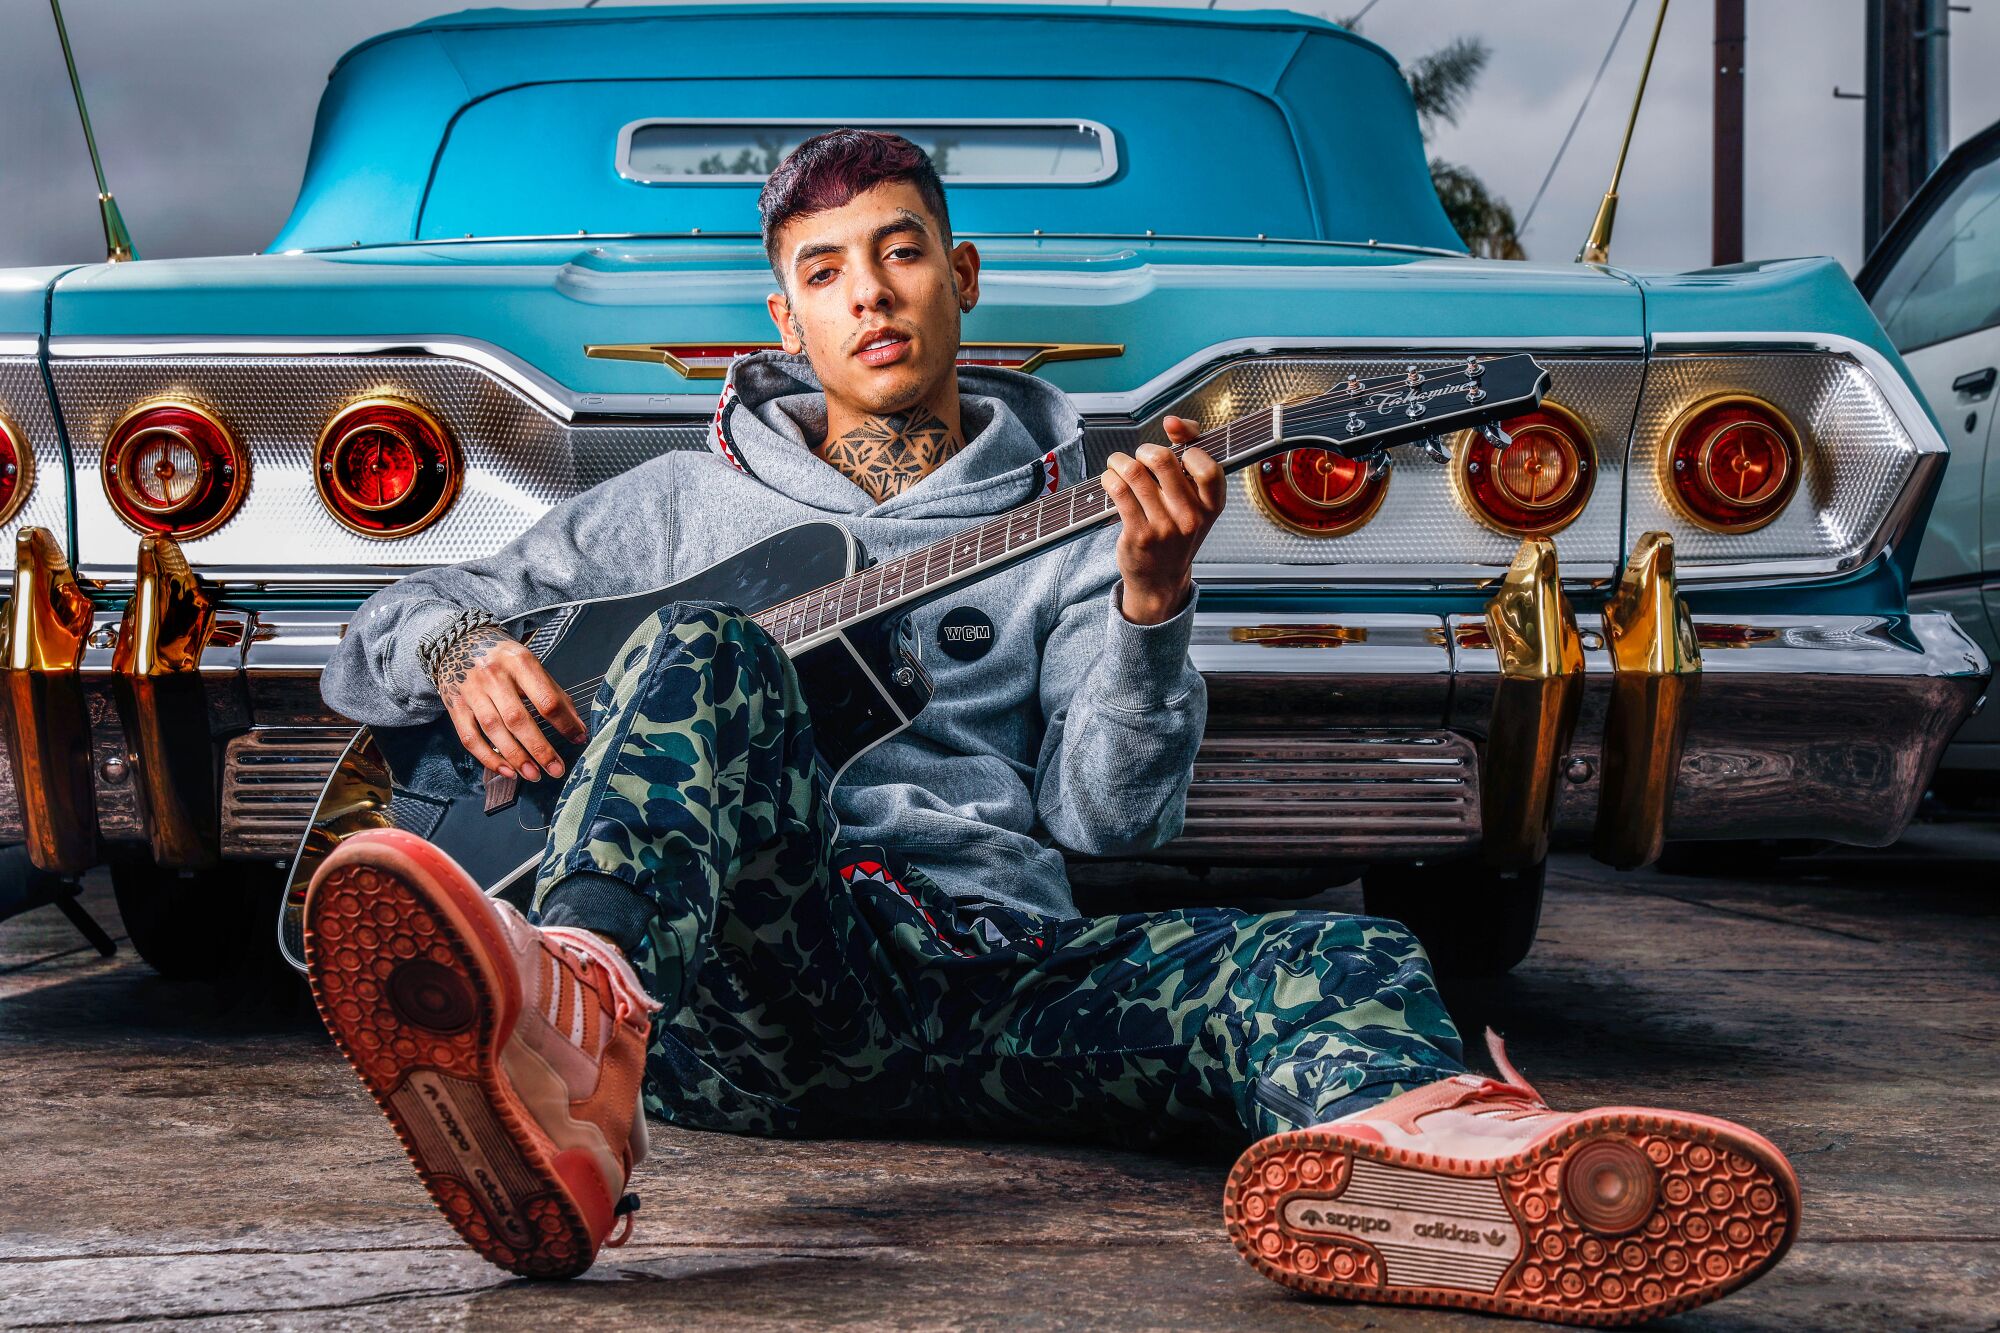 Natanael Cano holds a guitar and leans against a vintage car. 